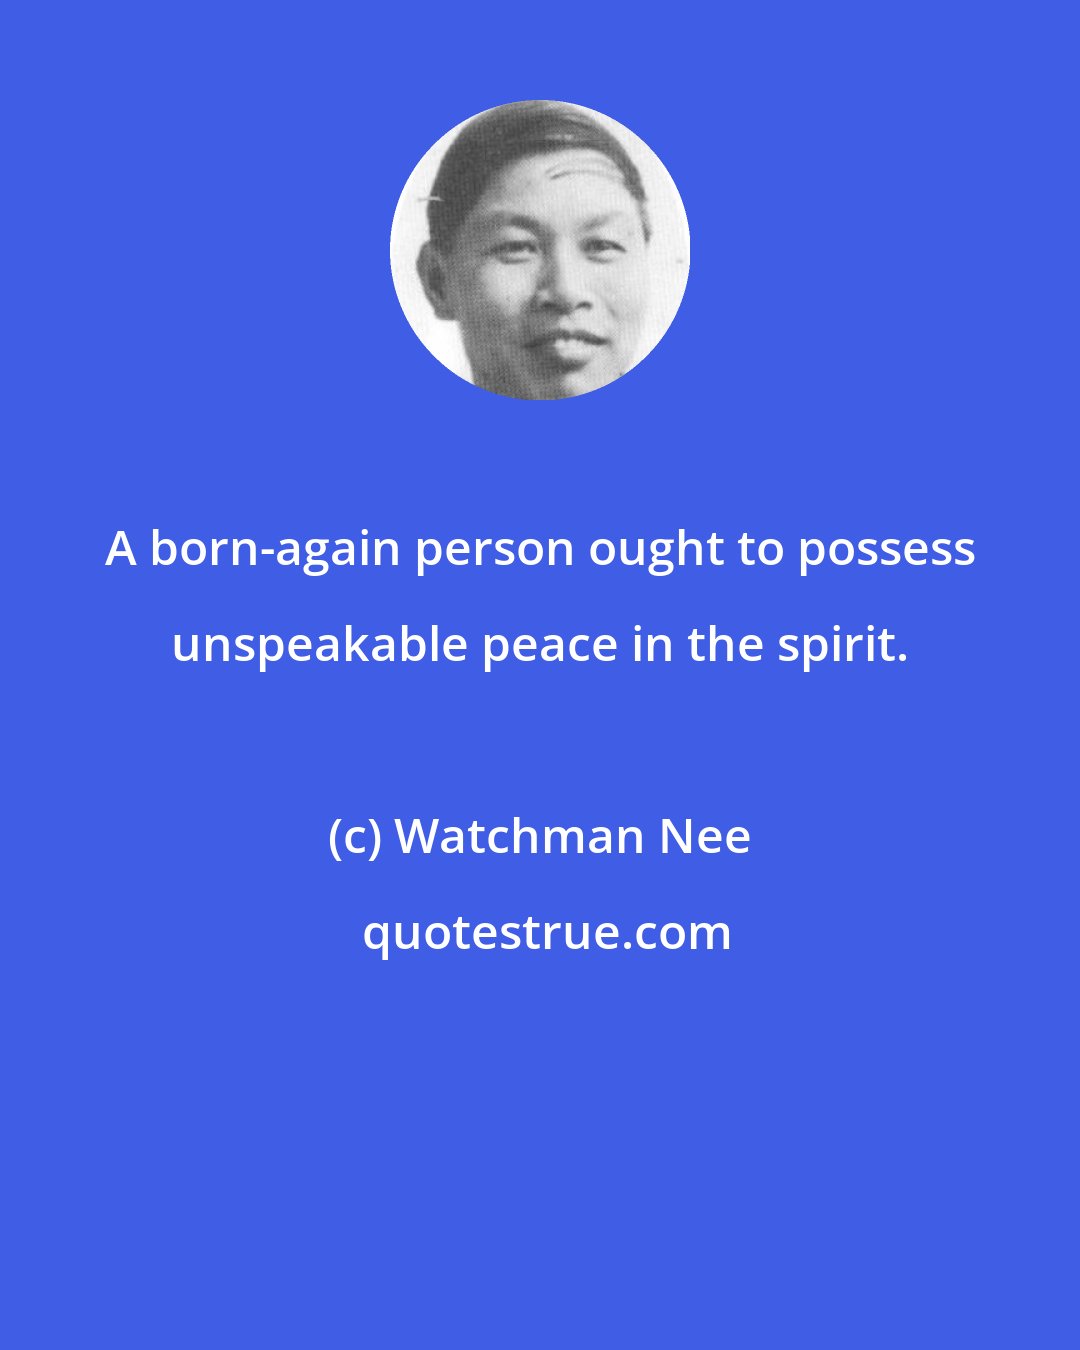 Watchman Nee: A born-again person ought to possess unspeakable peace in the spirit.